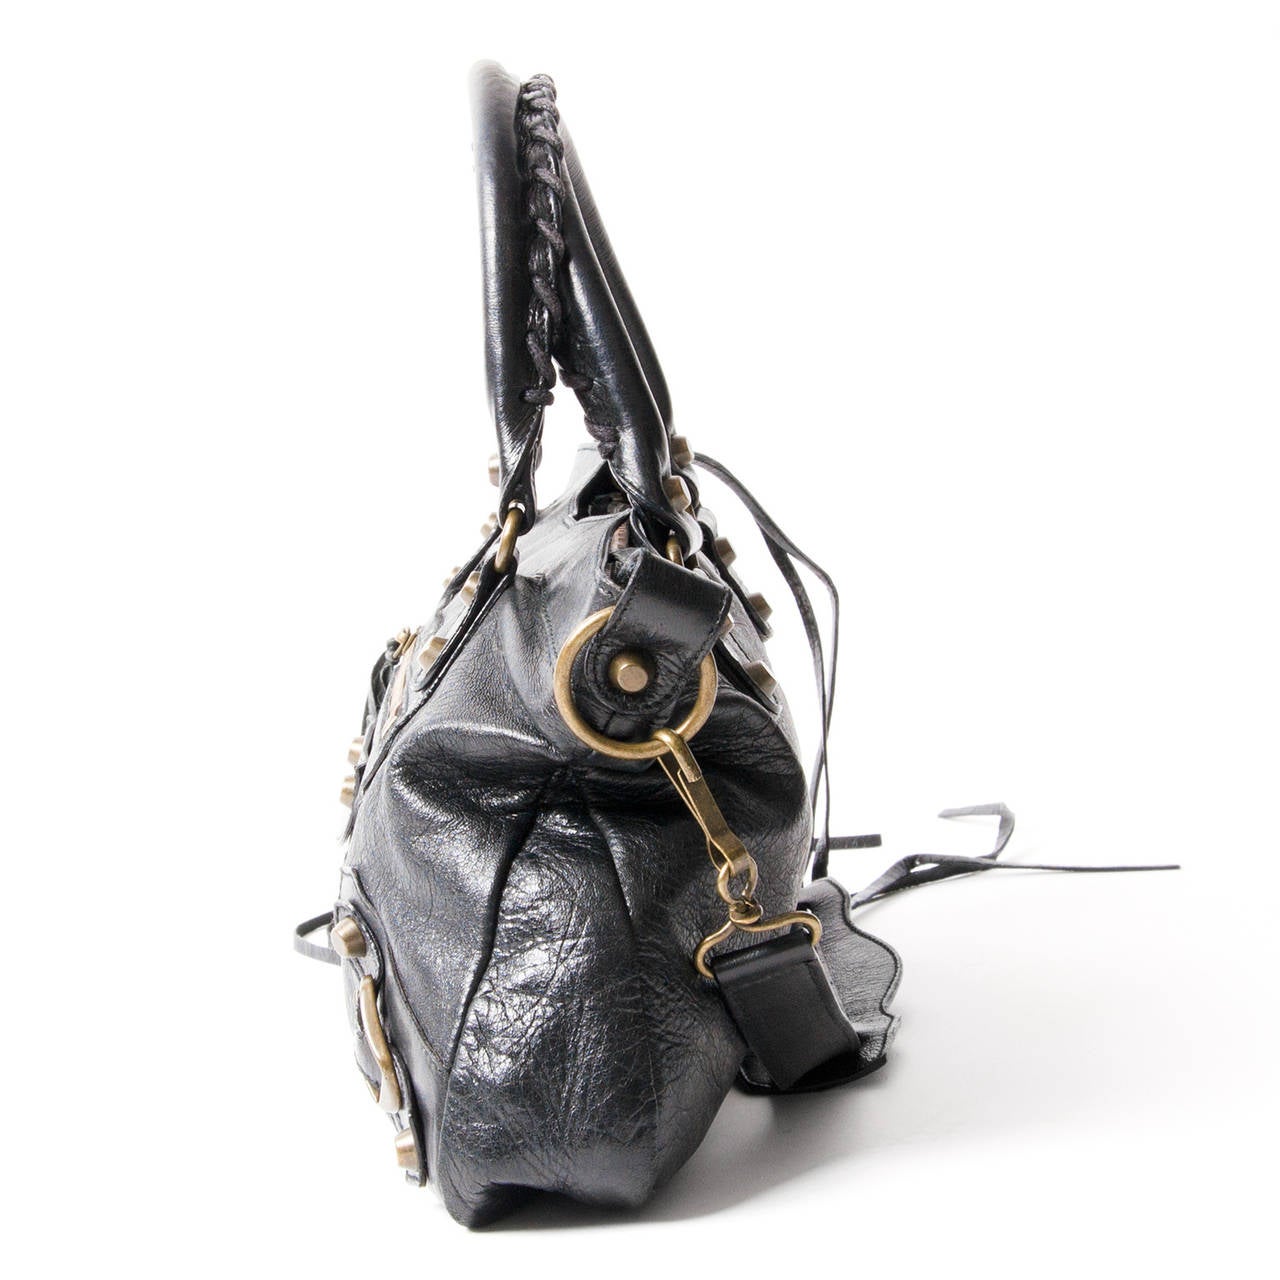 Balenciaga Nero (black) Classic First bag styled with aged brasstone hardware.
Zip pocket and metal buckles and studs at front Lined with fabric; zip pocket at interior.